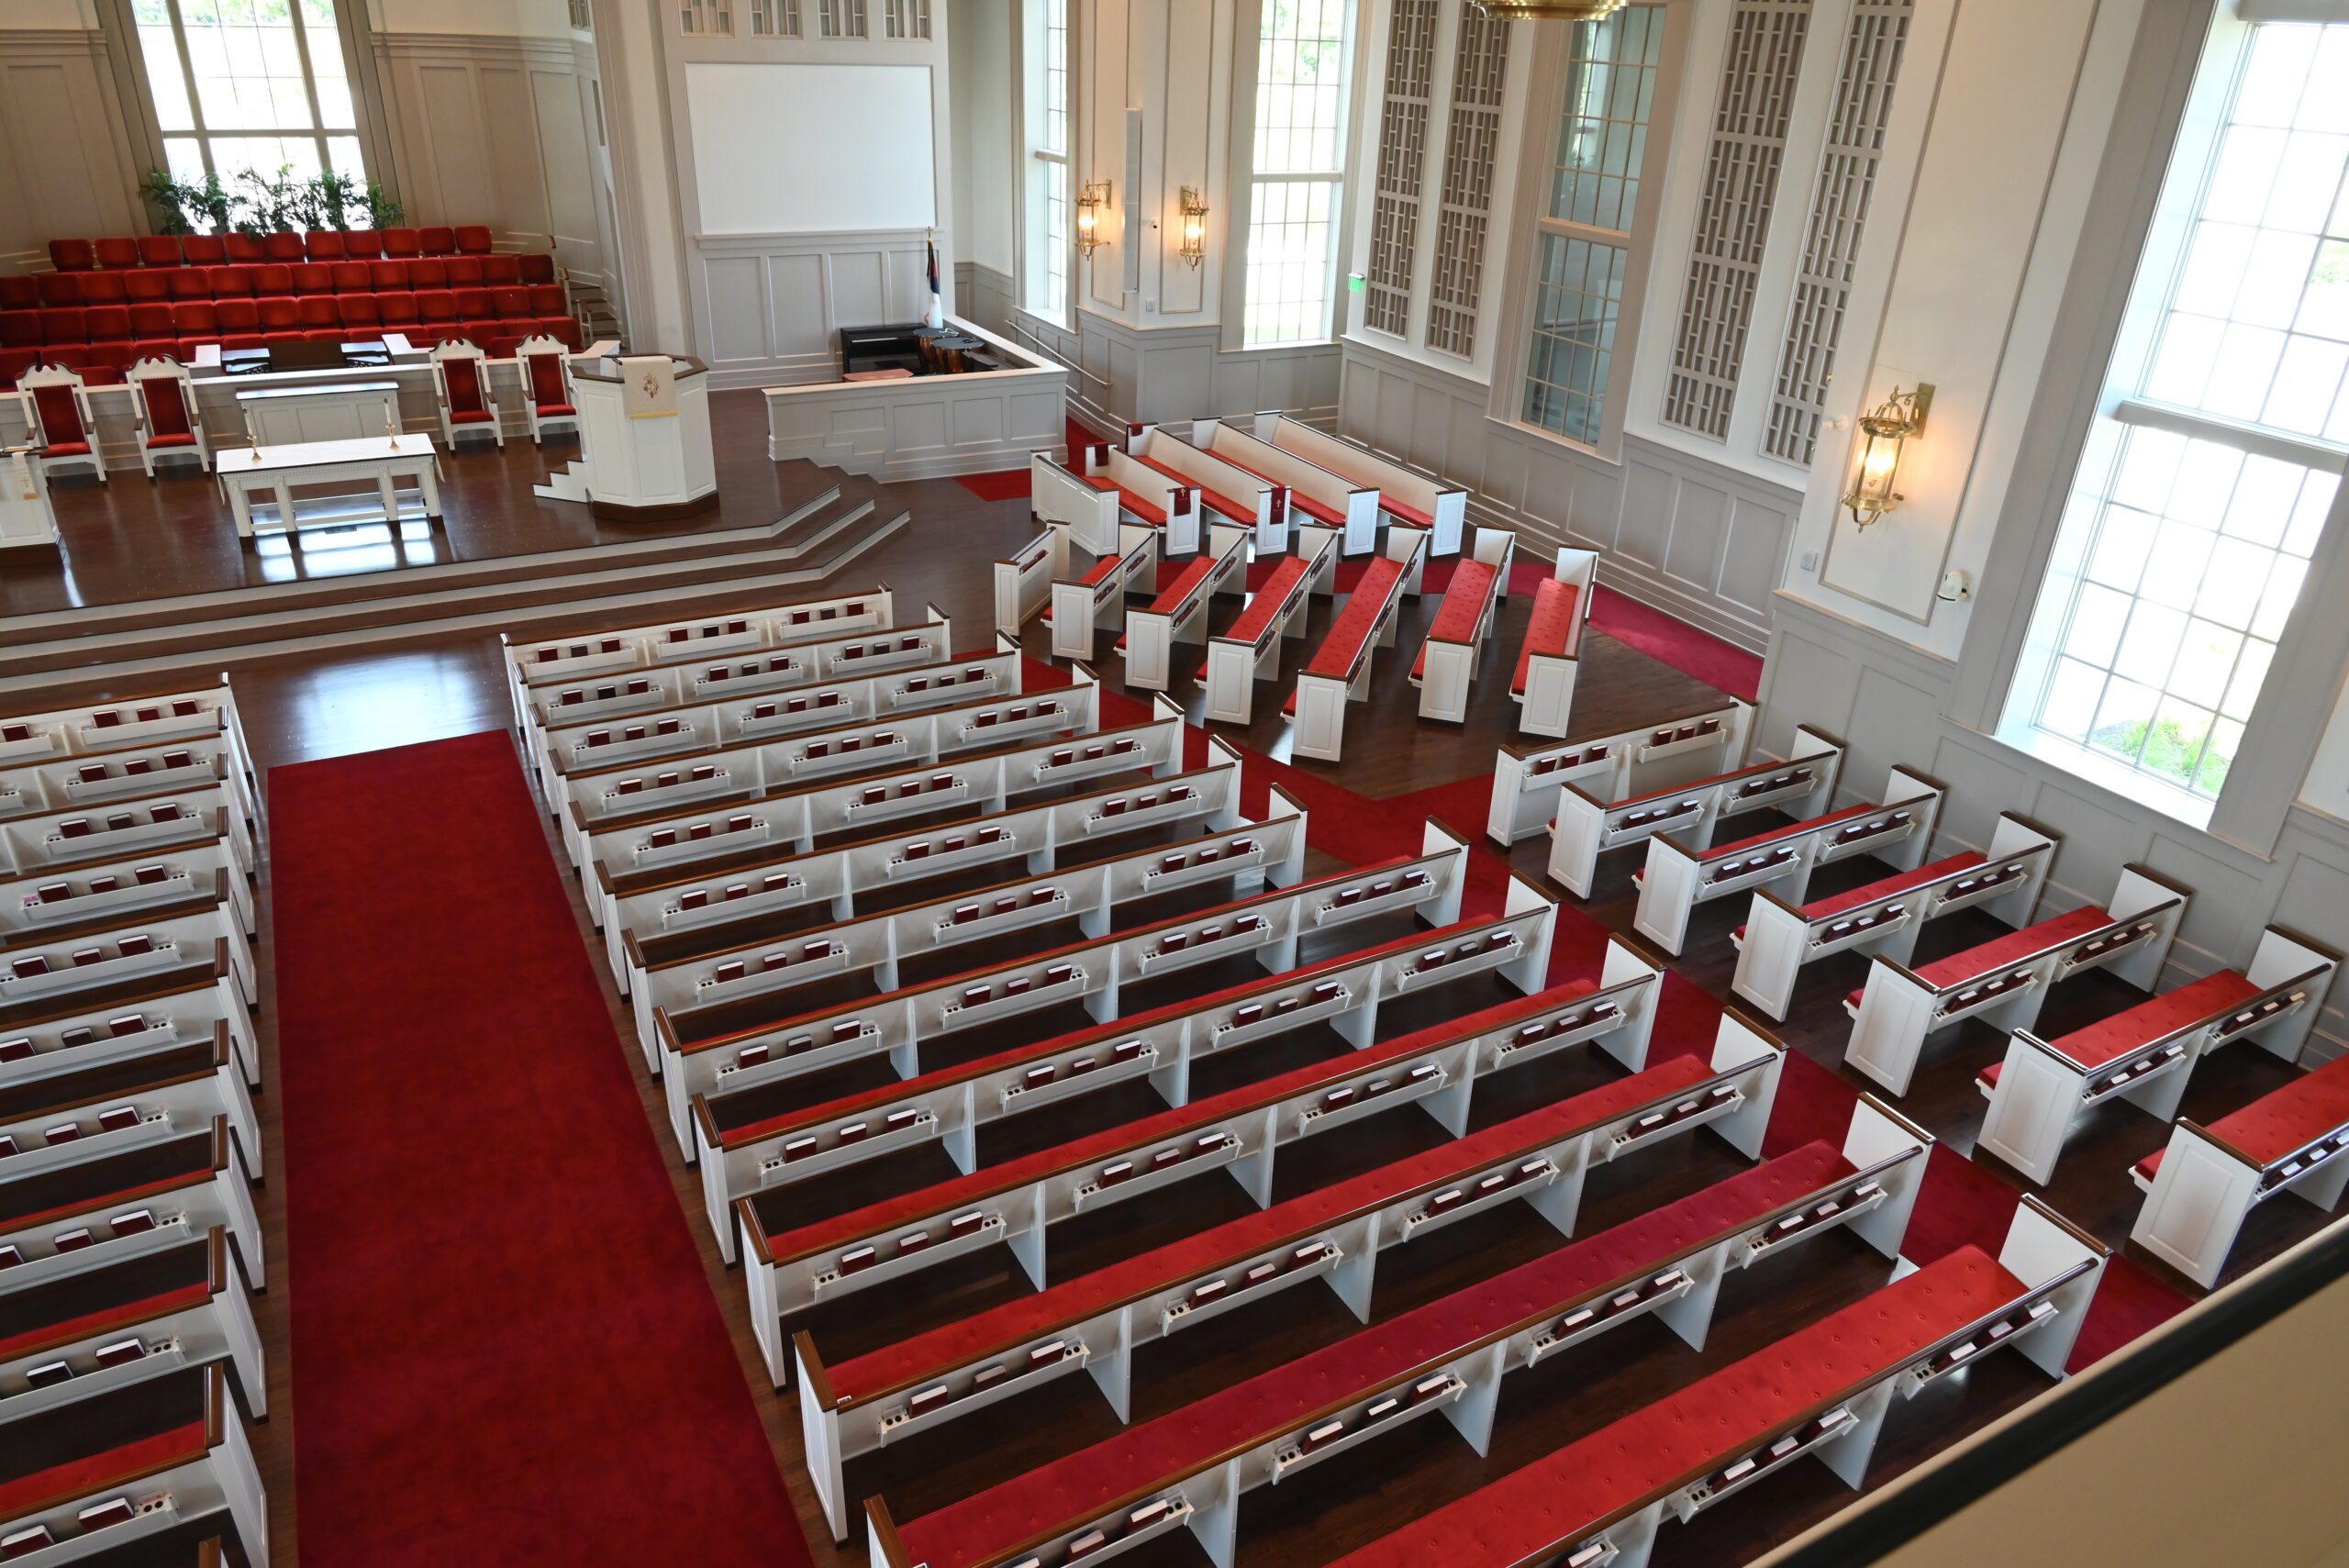 The rows of straight pews at First Presbyterian, Myrtle Beach, SC